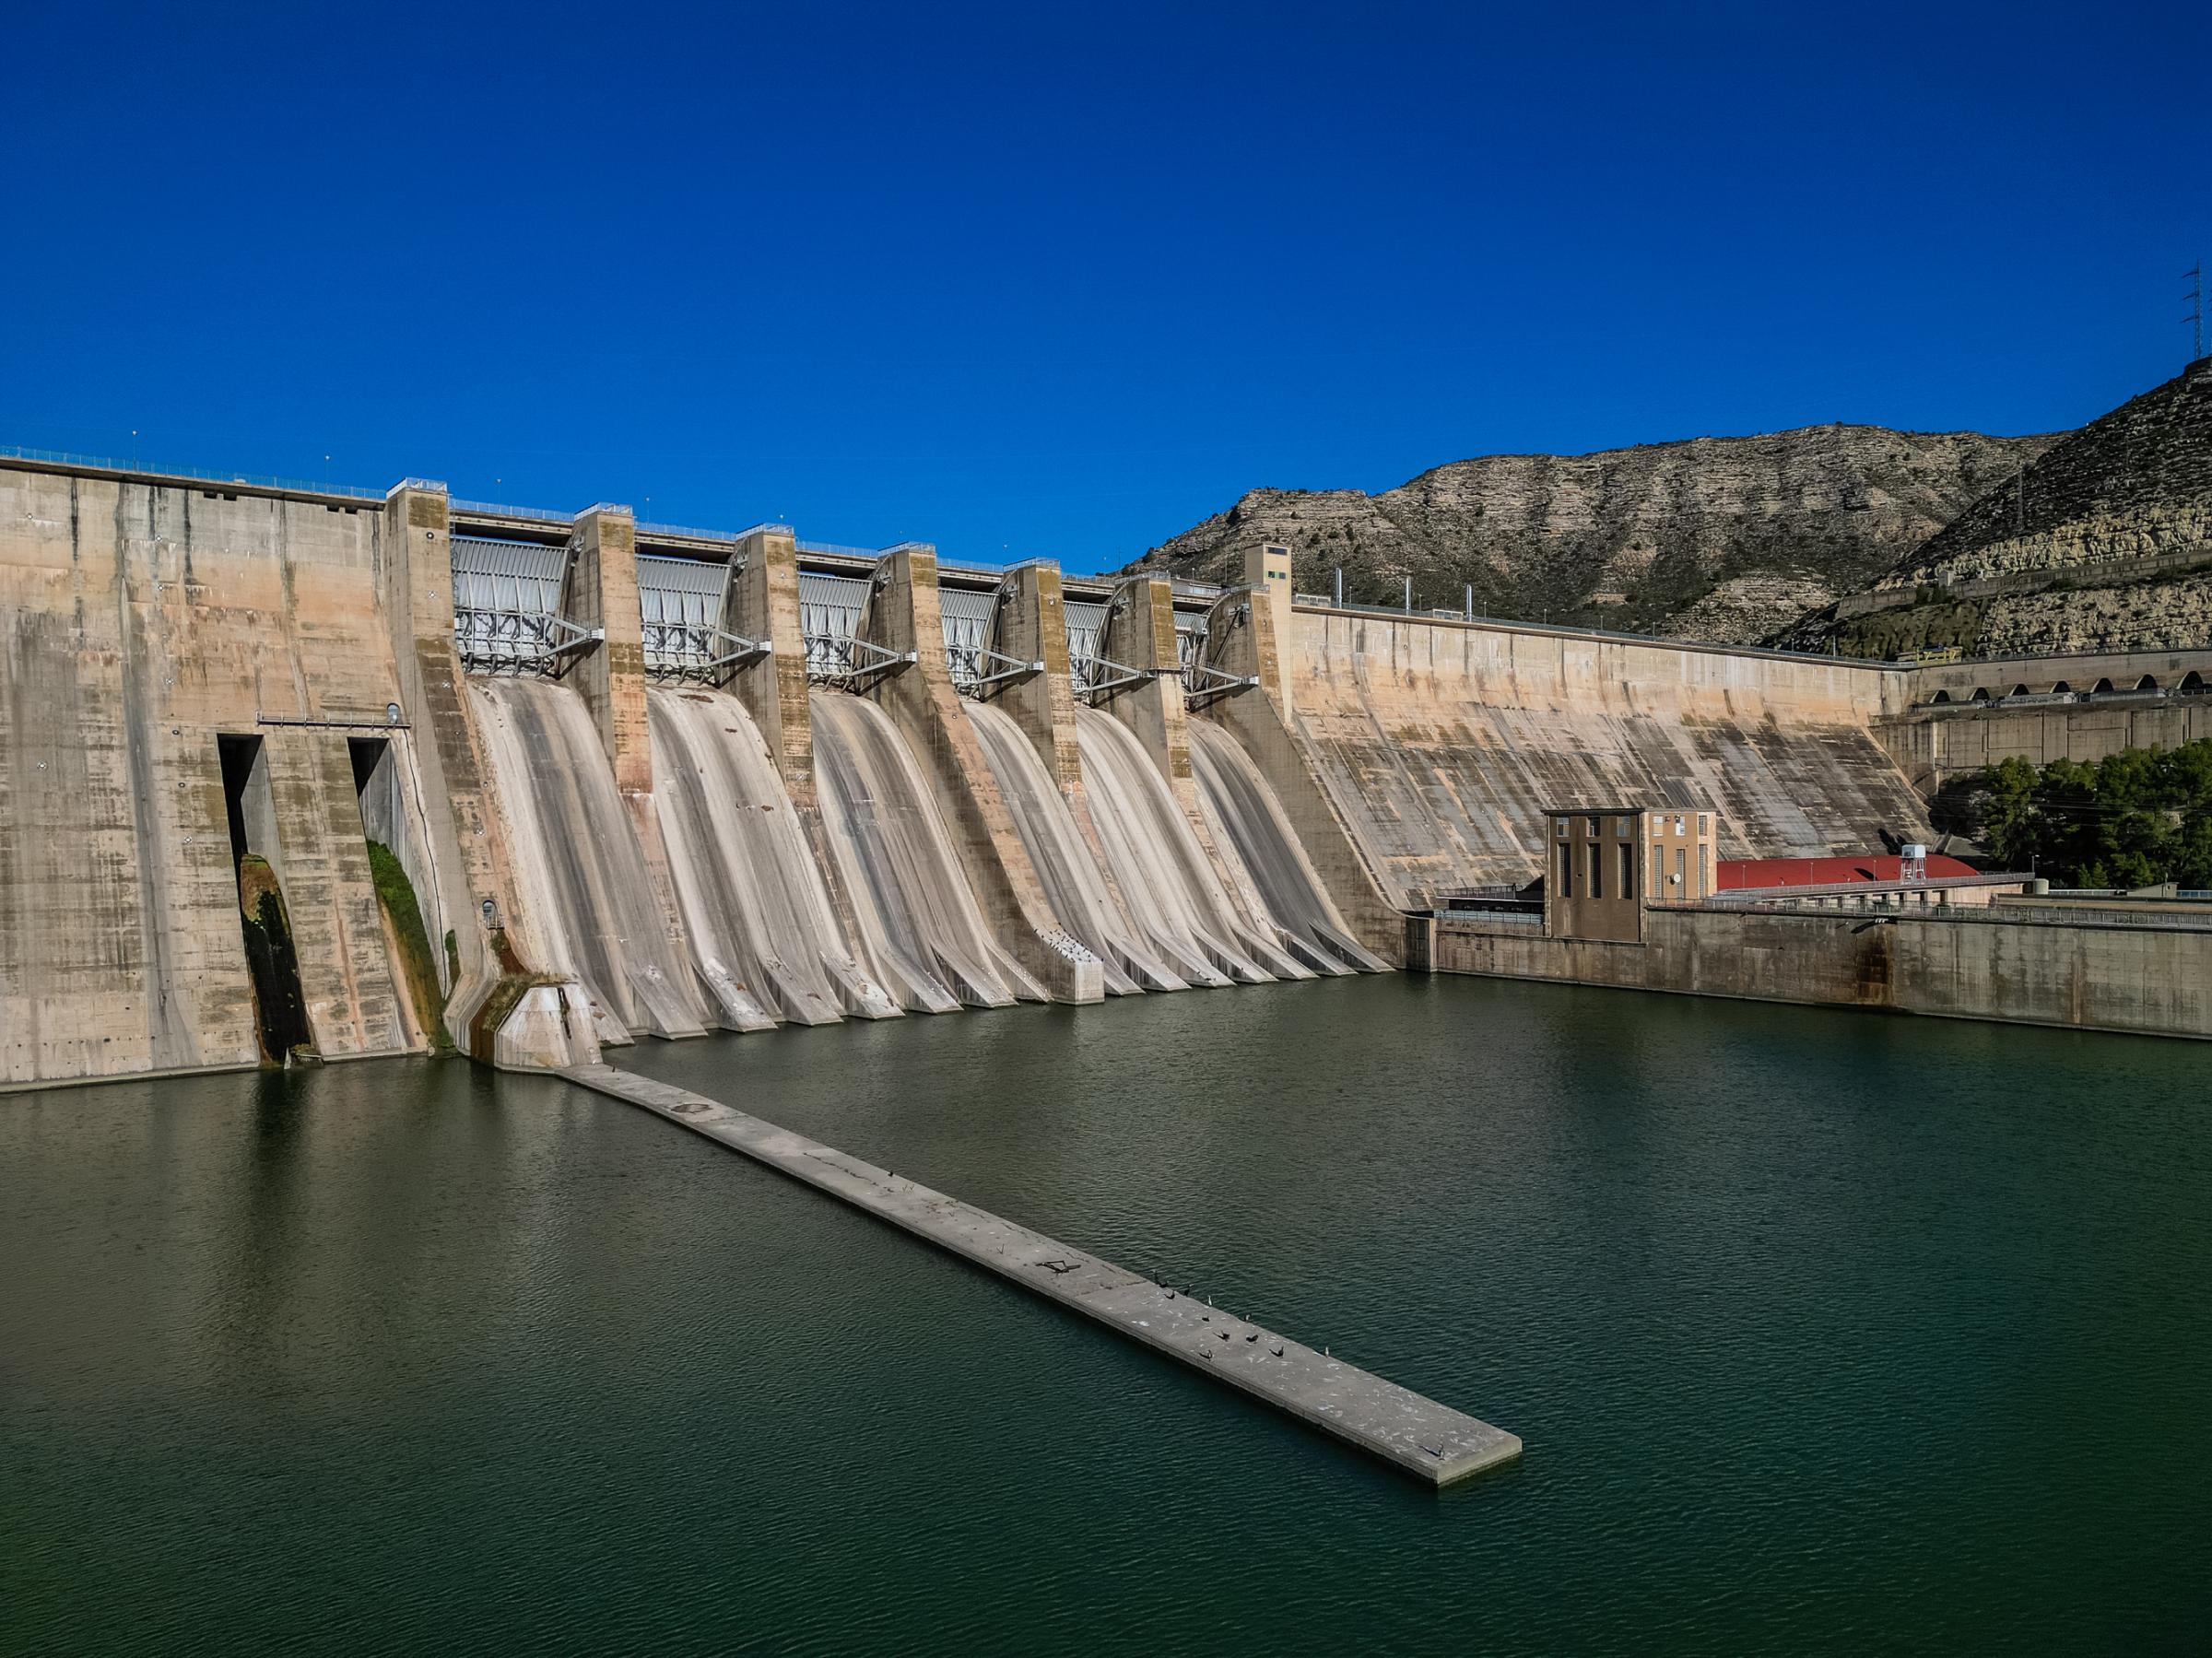 Spain's Drought Threatens Electricity Production At Mequinenza Plant - MEQUINENZA, SPAIN - NOVEMBER 05: Hydroelectric Power...